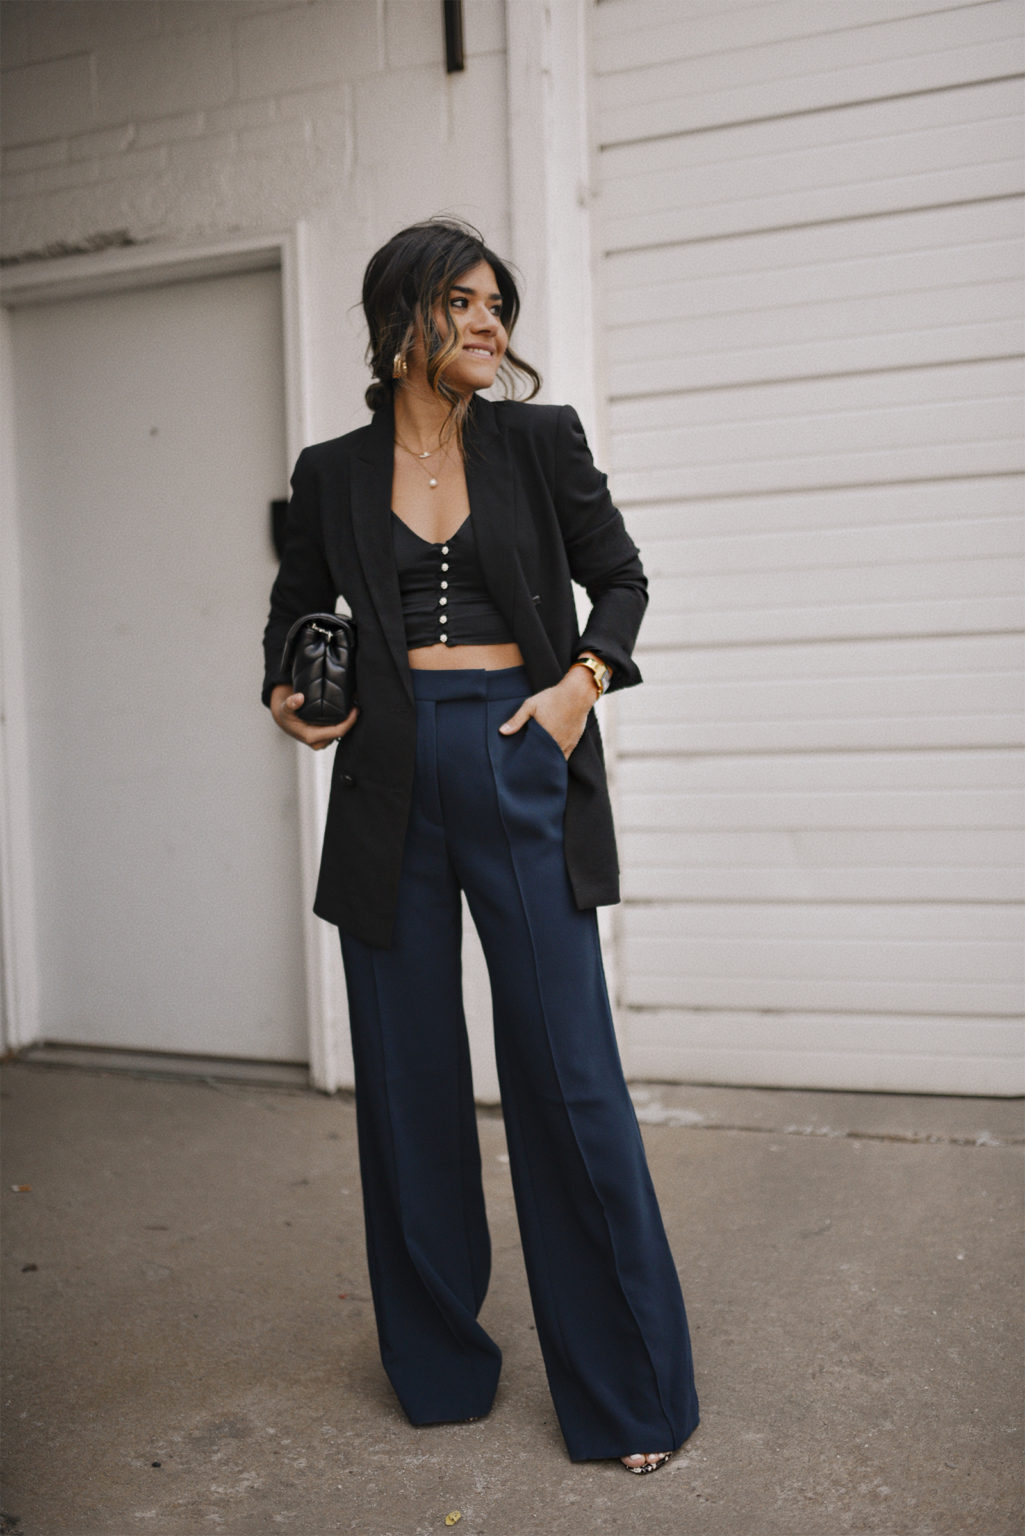 A CHIC WAY TO STYLE BLACK AND NAVY BLUE TOGETHER | CHIC TALK | CHIC TALK